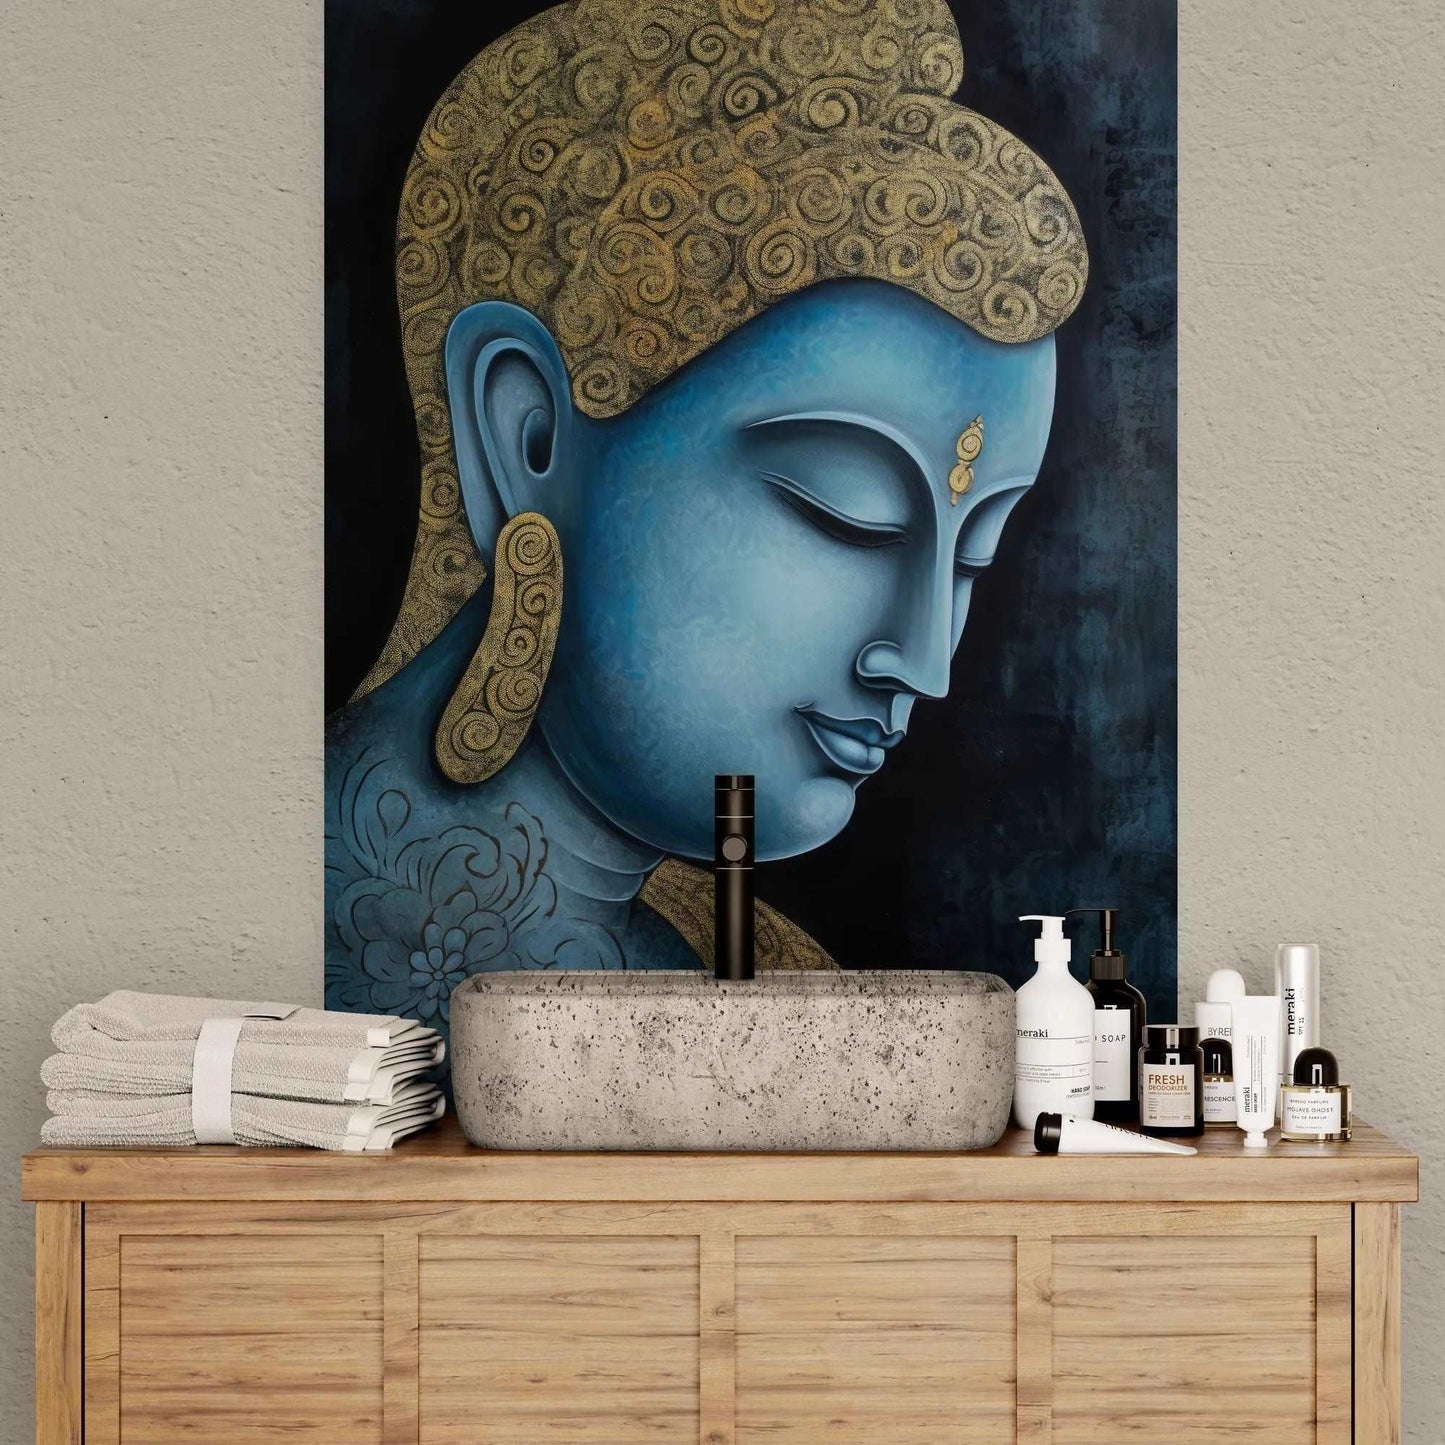 Close-up of a serene blue and gold Buddha painting in a bathroom setting, above a stone sink with neatly folded towels and skincare products.